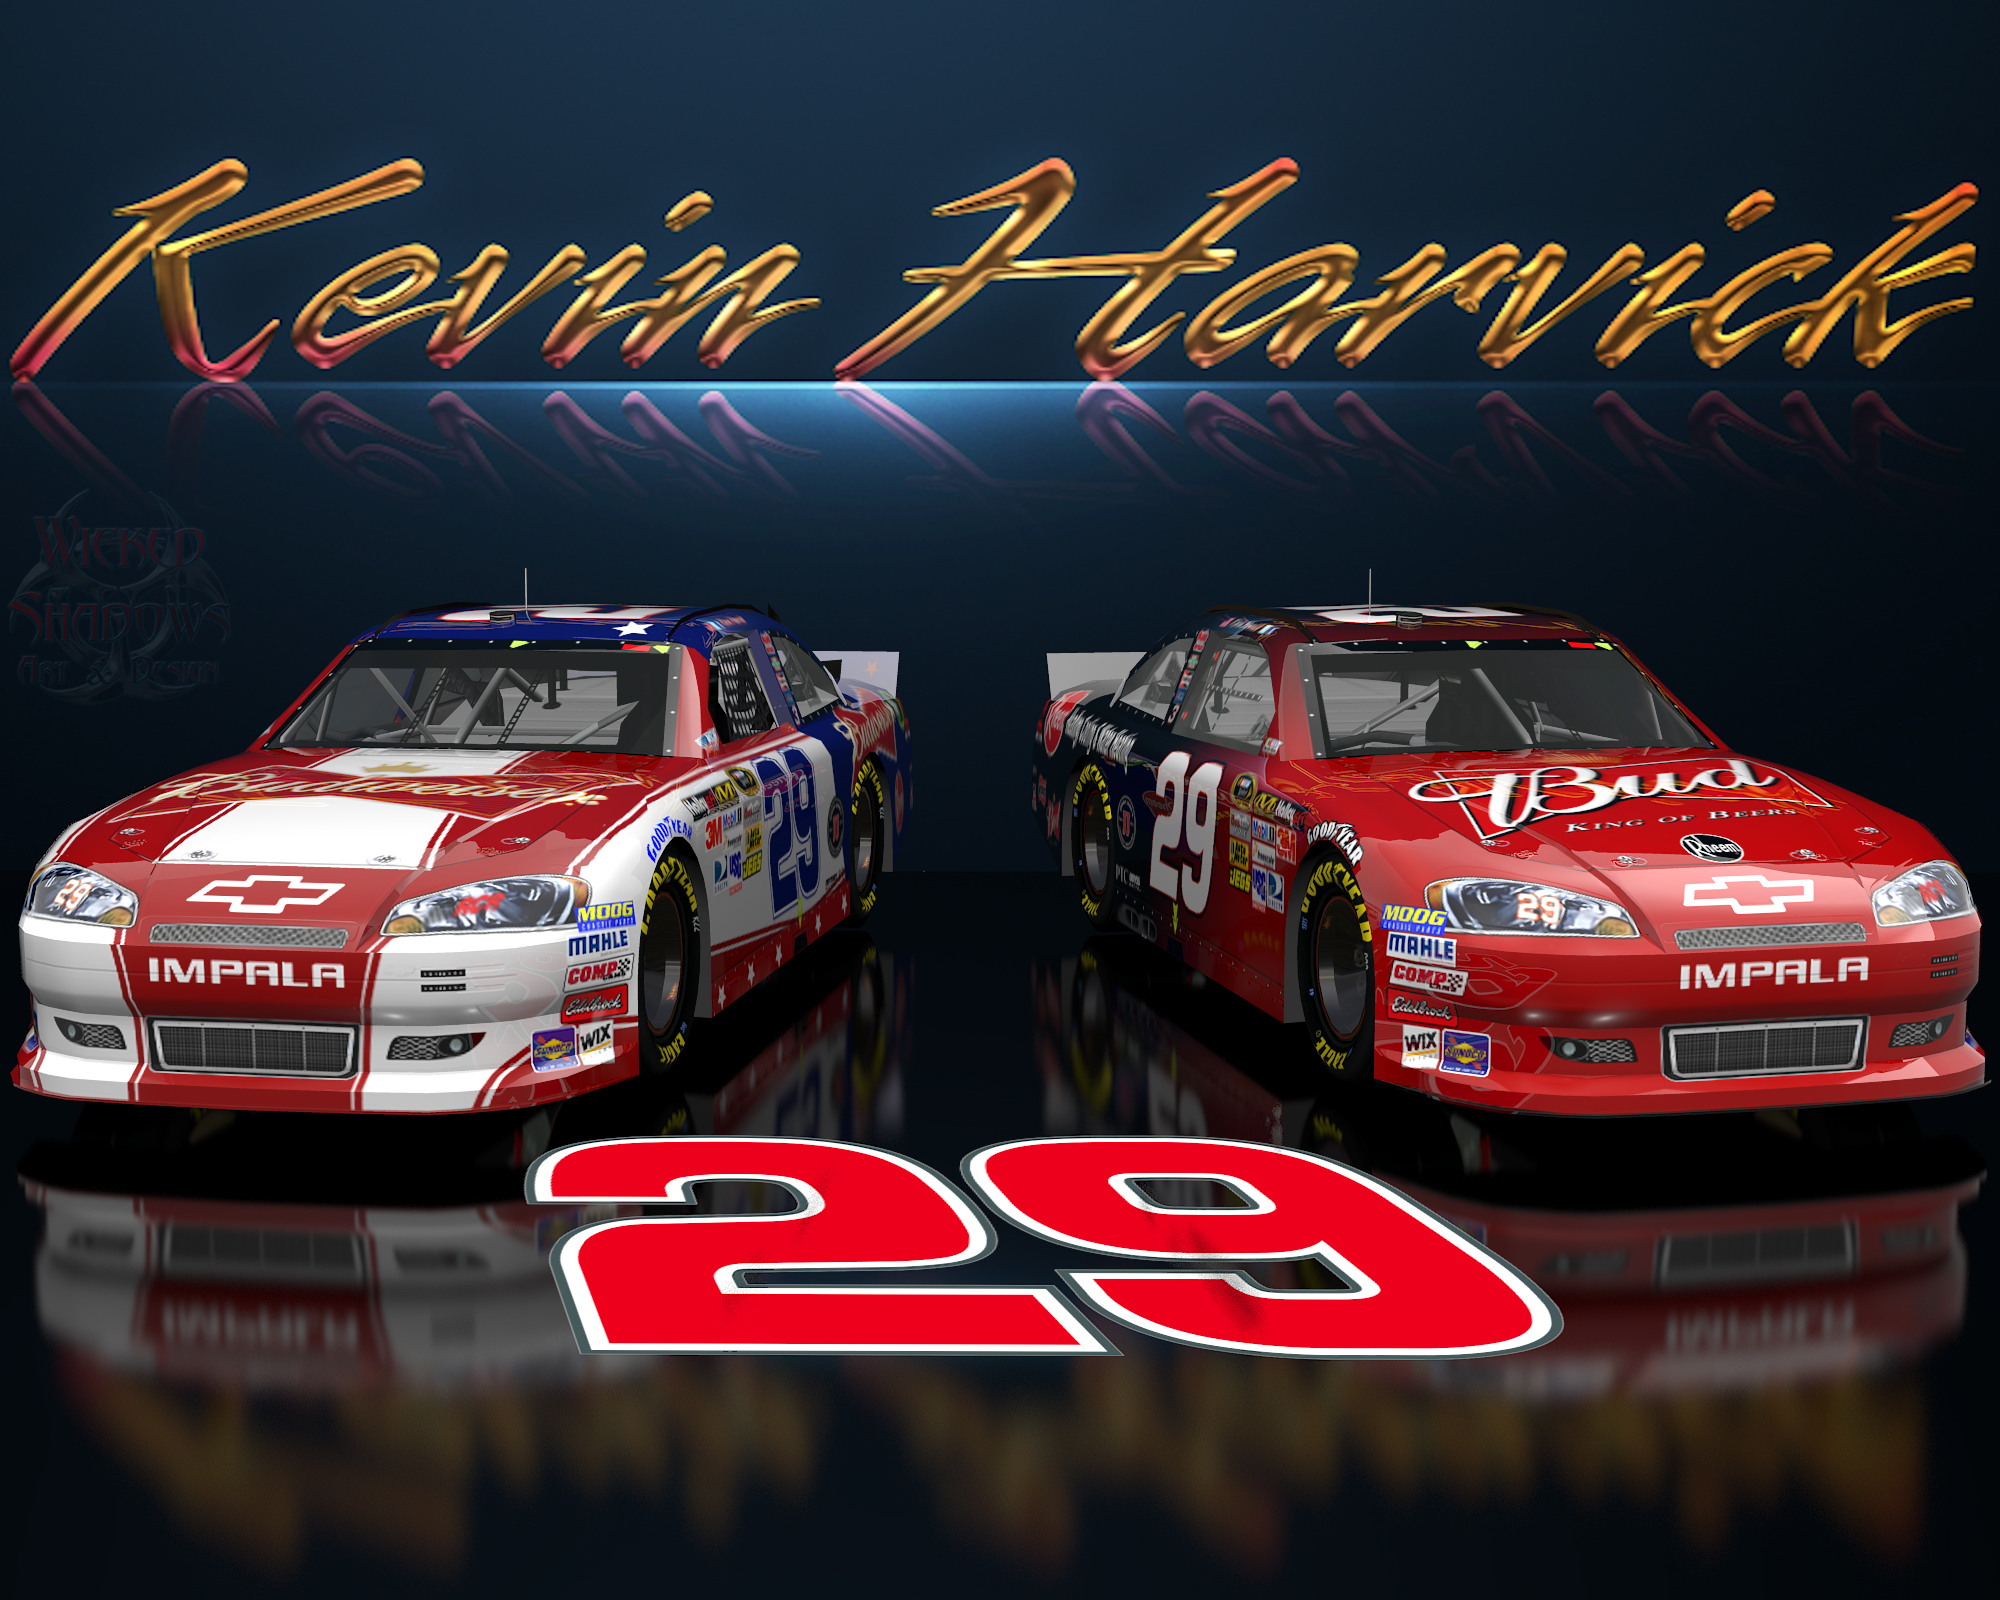 Kevin Harvick Budweiser Wicked Text Wallpaper